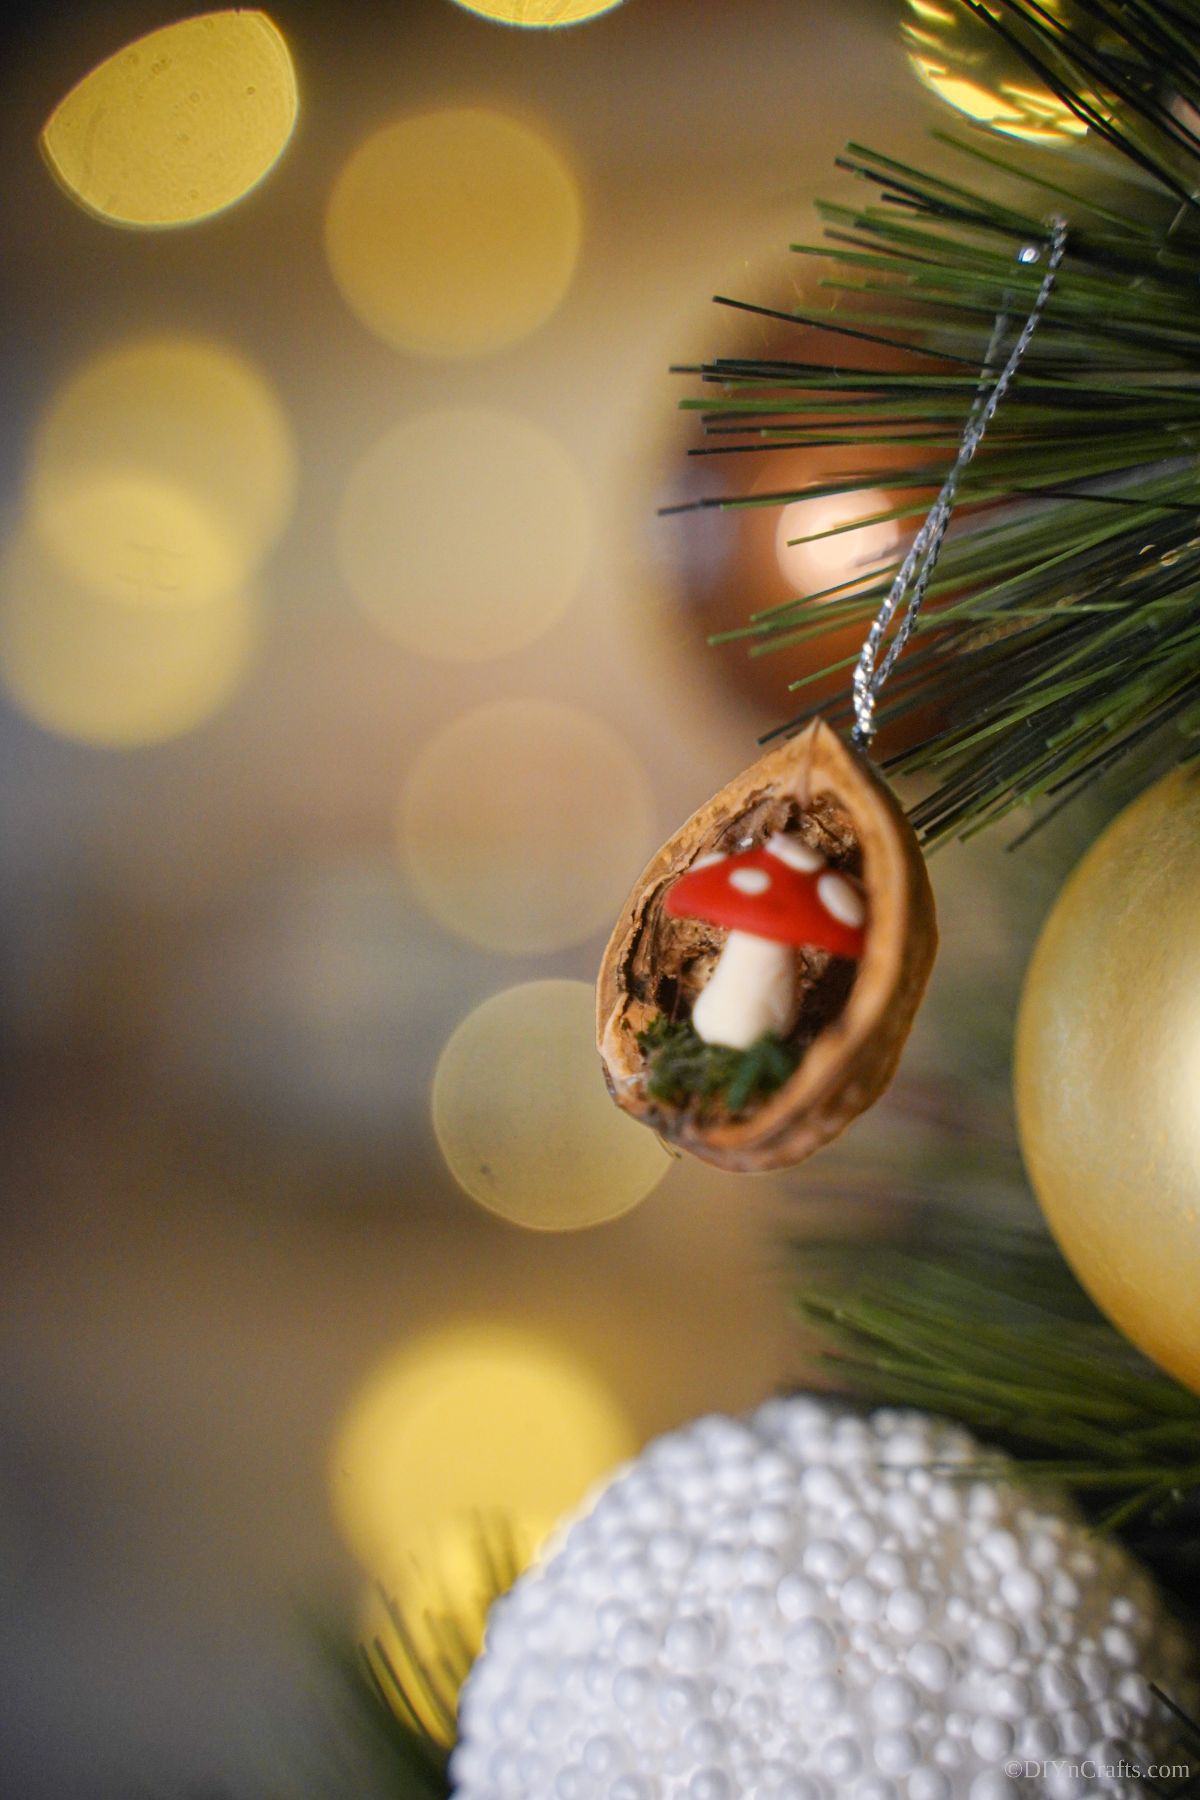 walnut shell with mini mushroom inside on silver string hanging from holiday tree